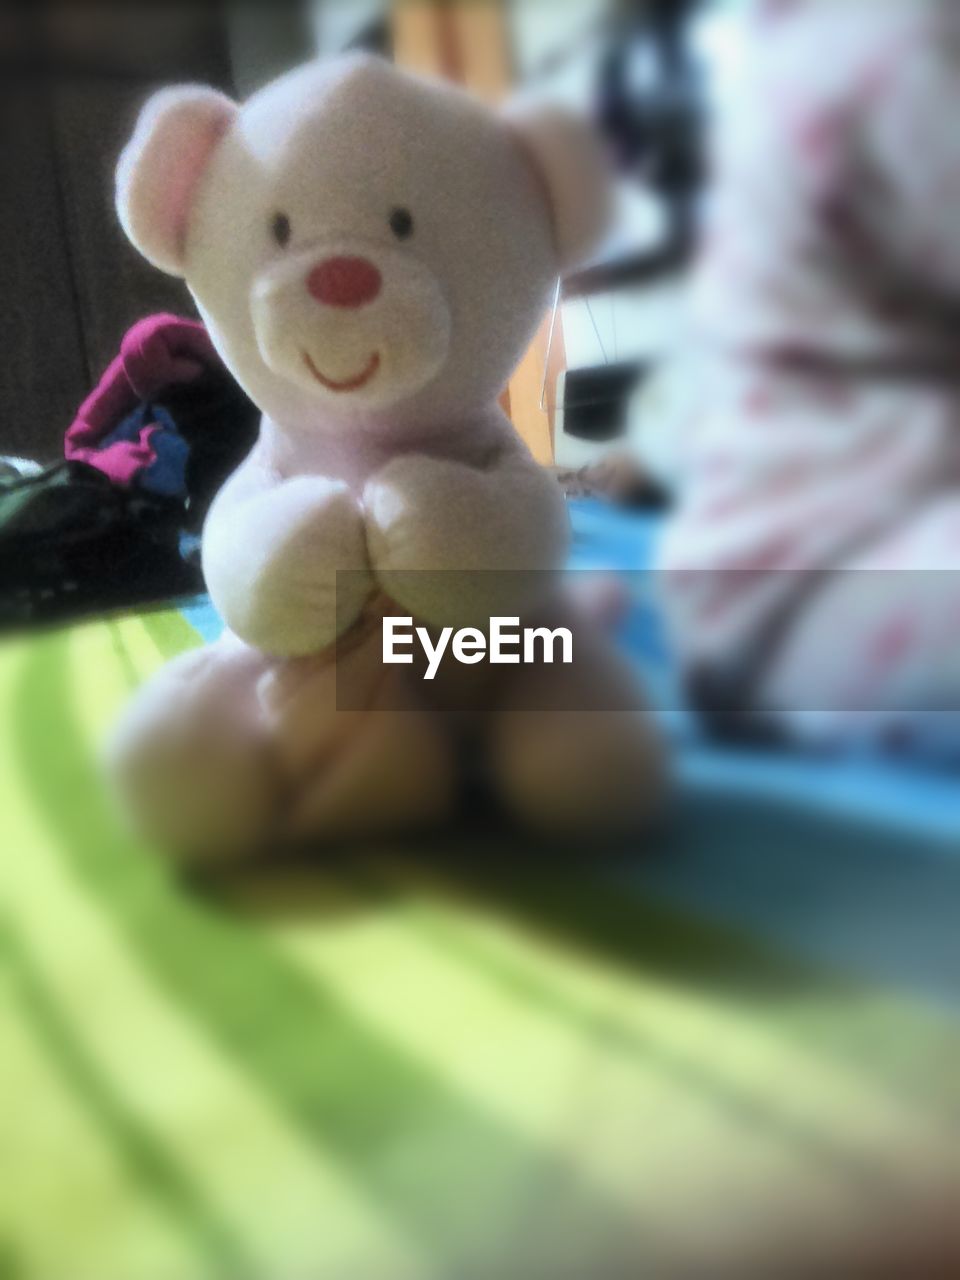 CLOSE-UP OF STUFFED TOY ON TABLE